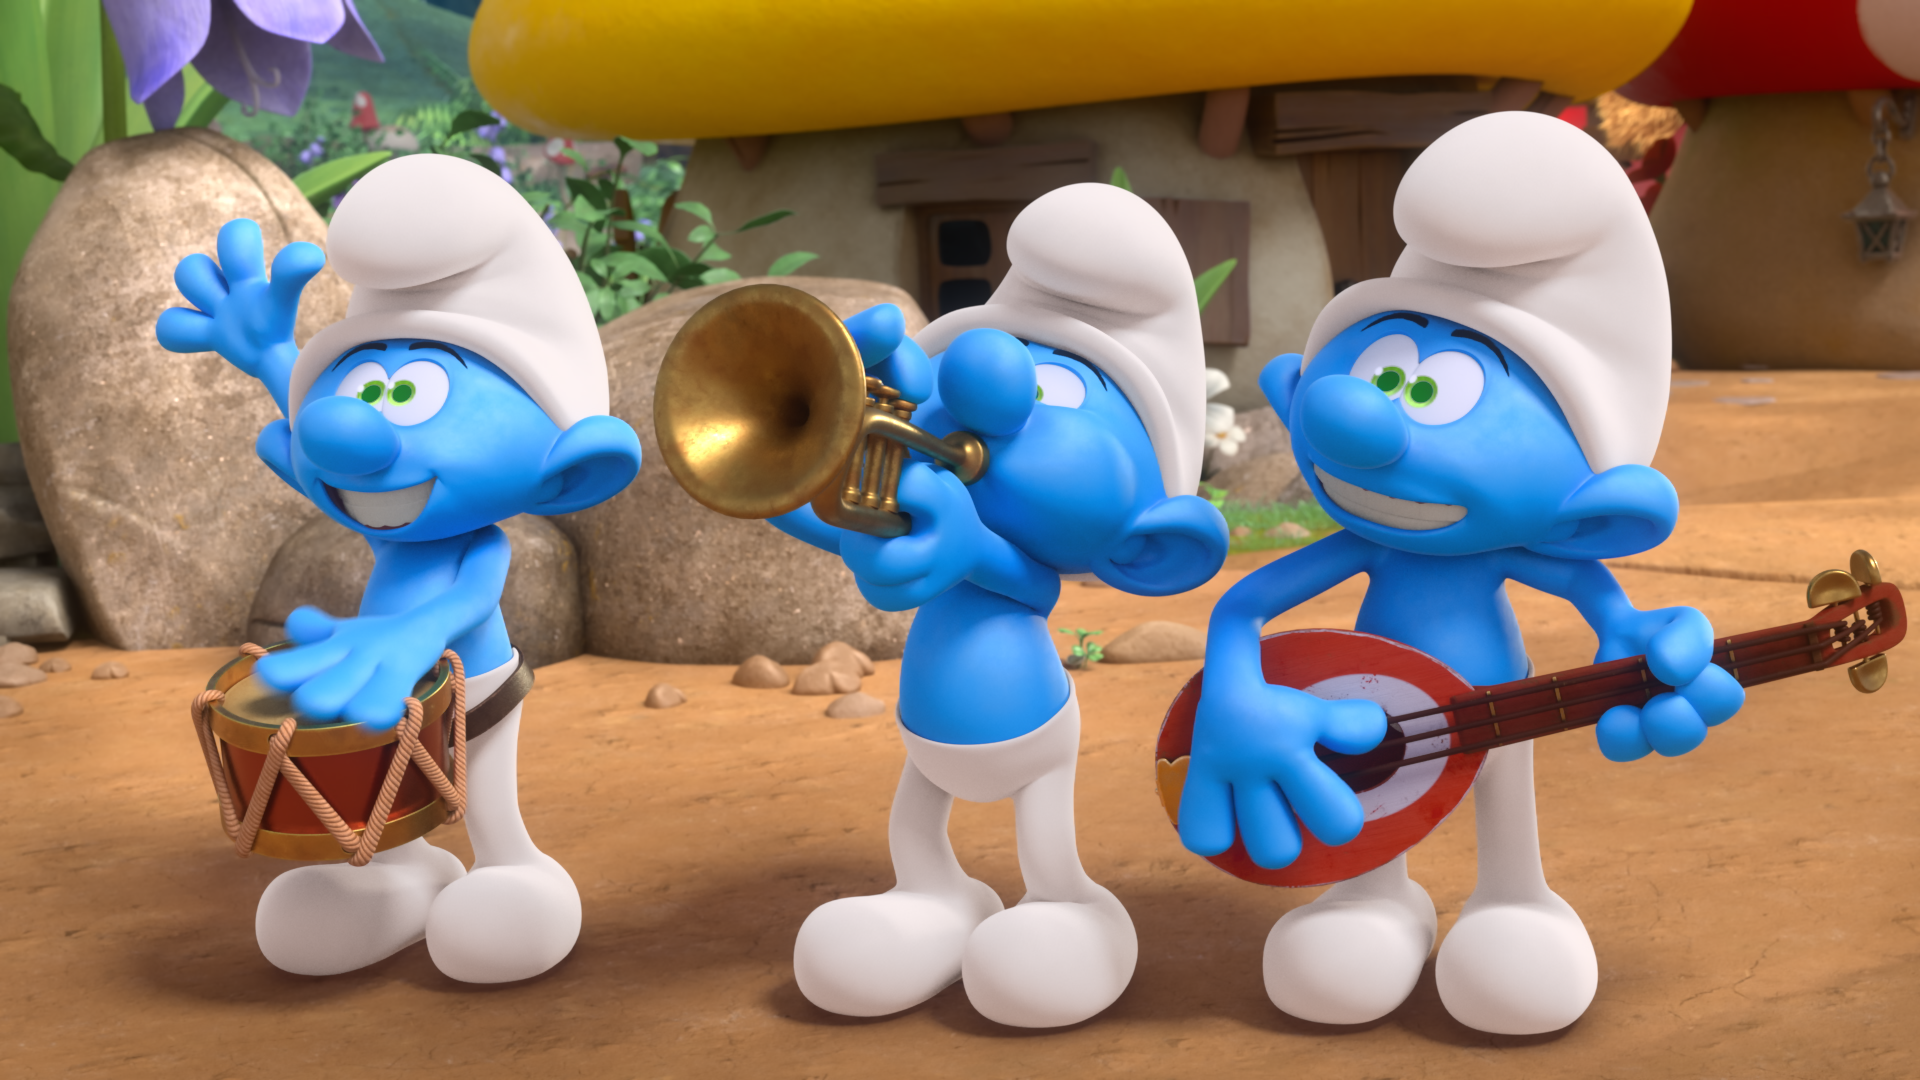 7. "The Smurfs" (2011) - wide 9